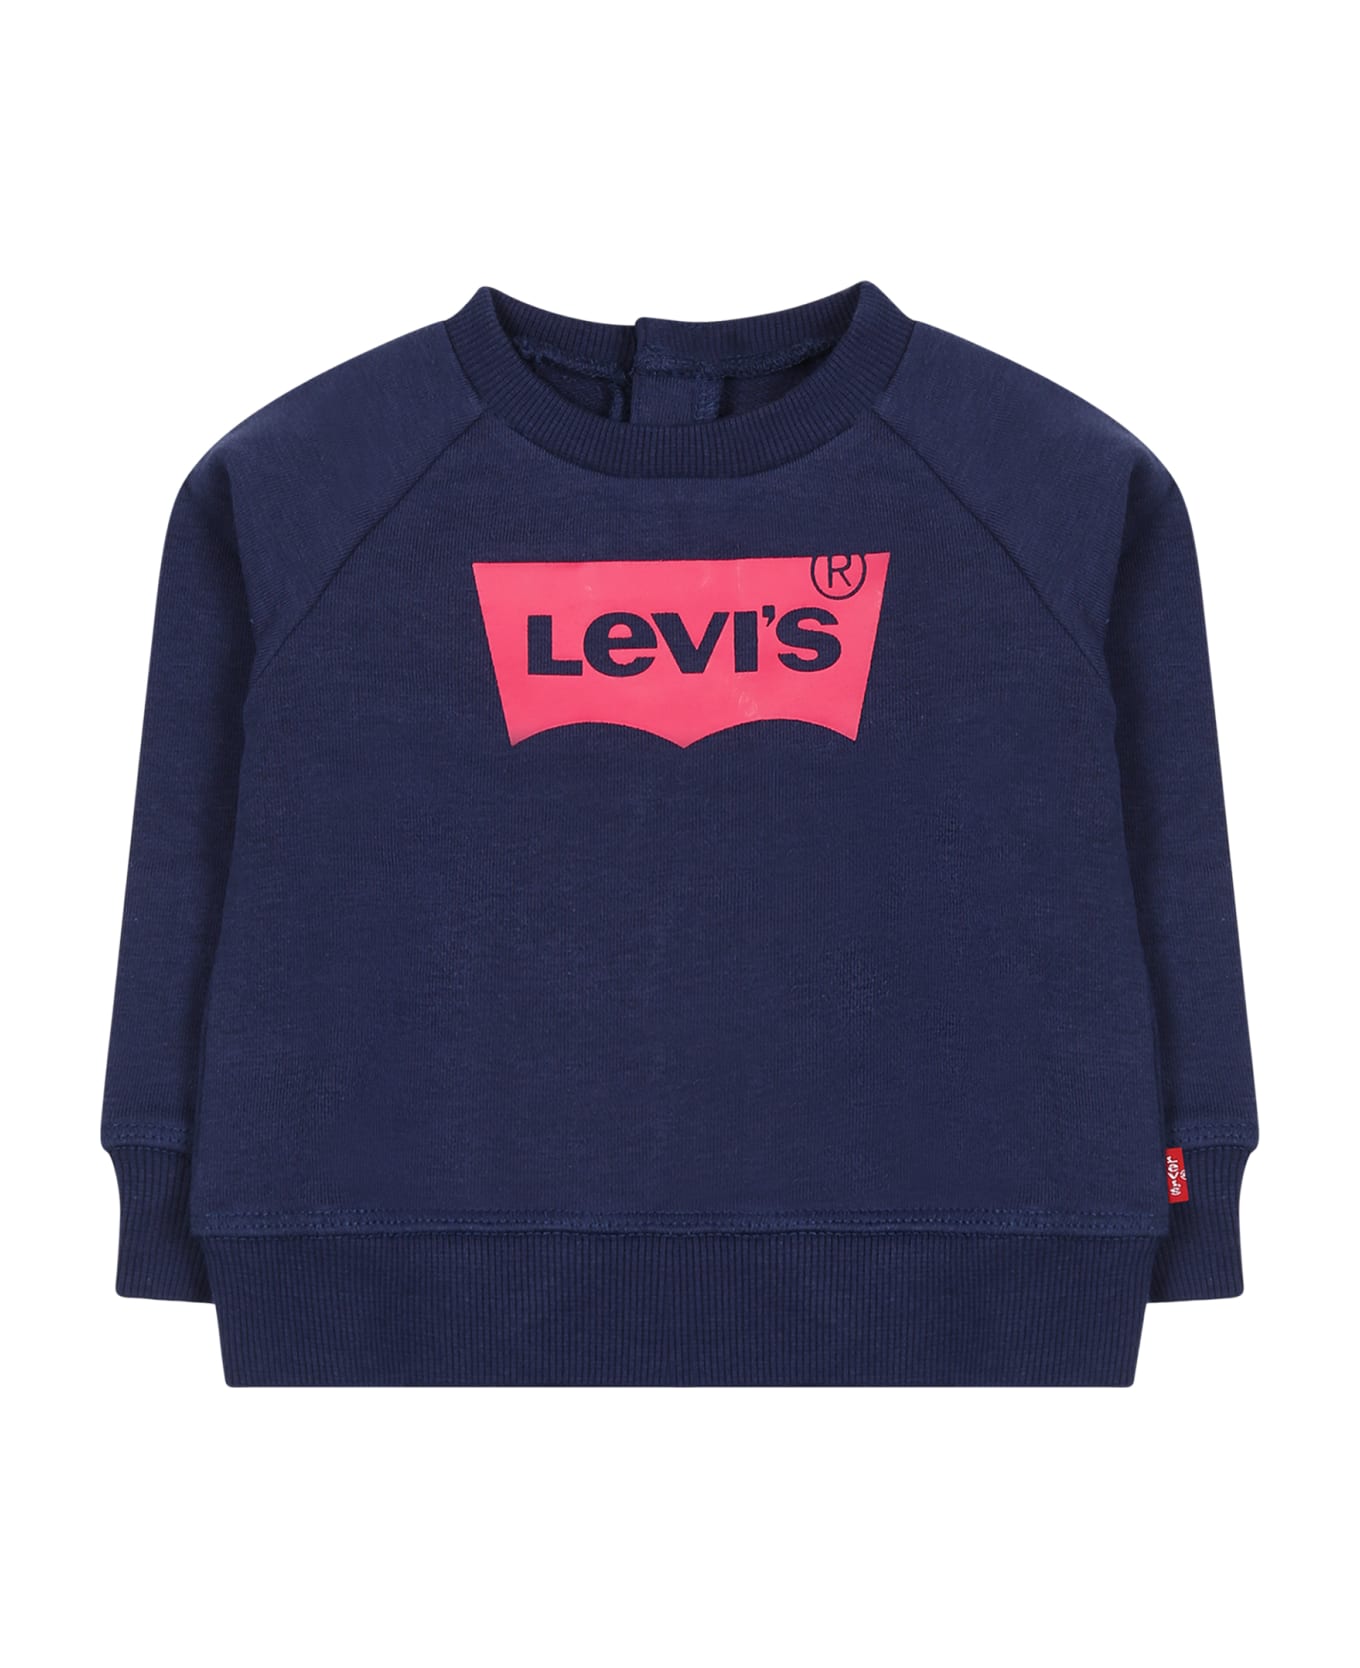 Levi's Blue Sweatshirt For Baby Girl With Logo - Blue